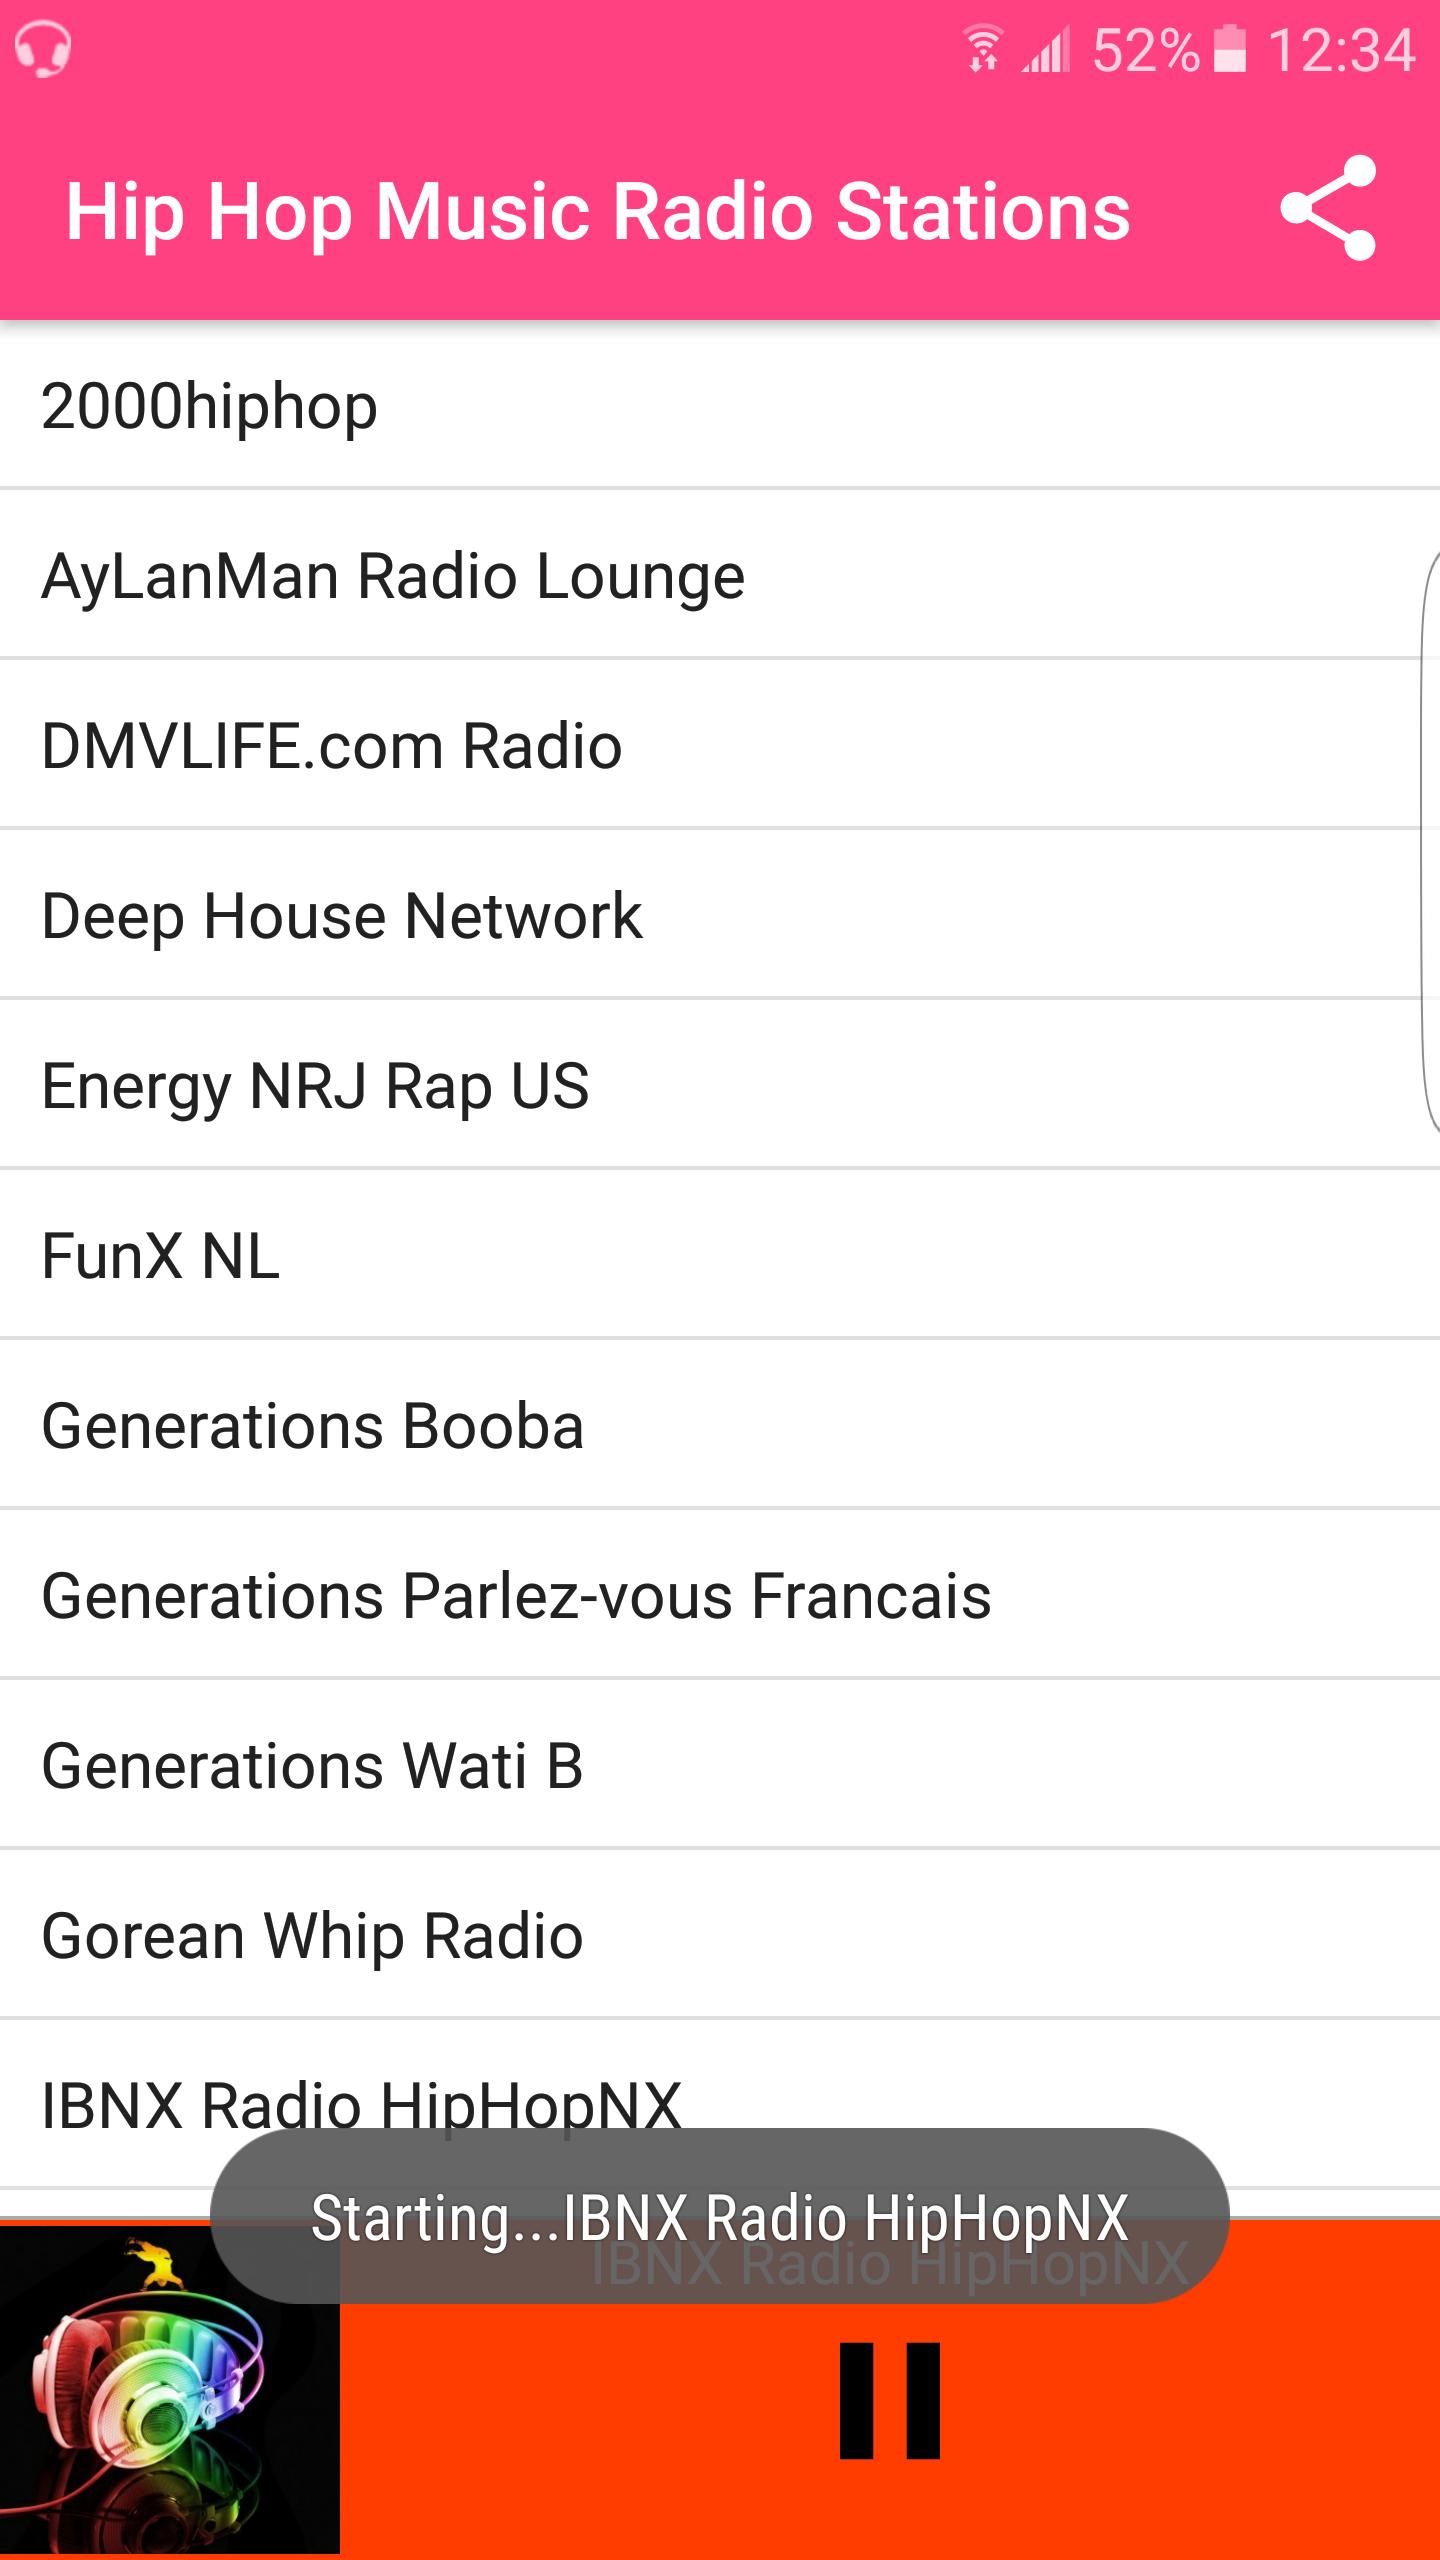 Hip Hop Music Radio Stations for Android - APK Download